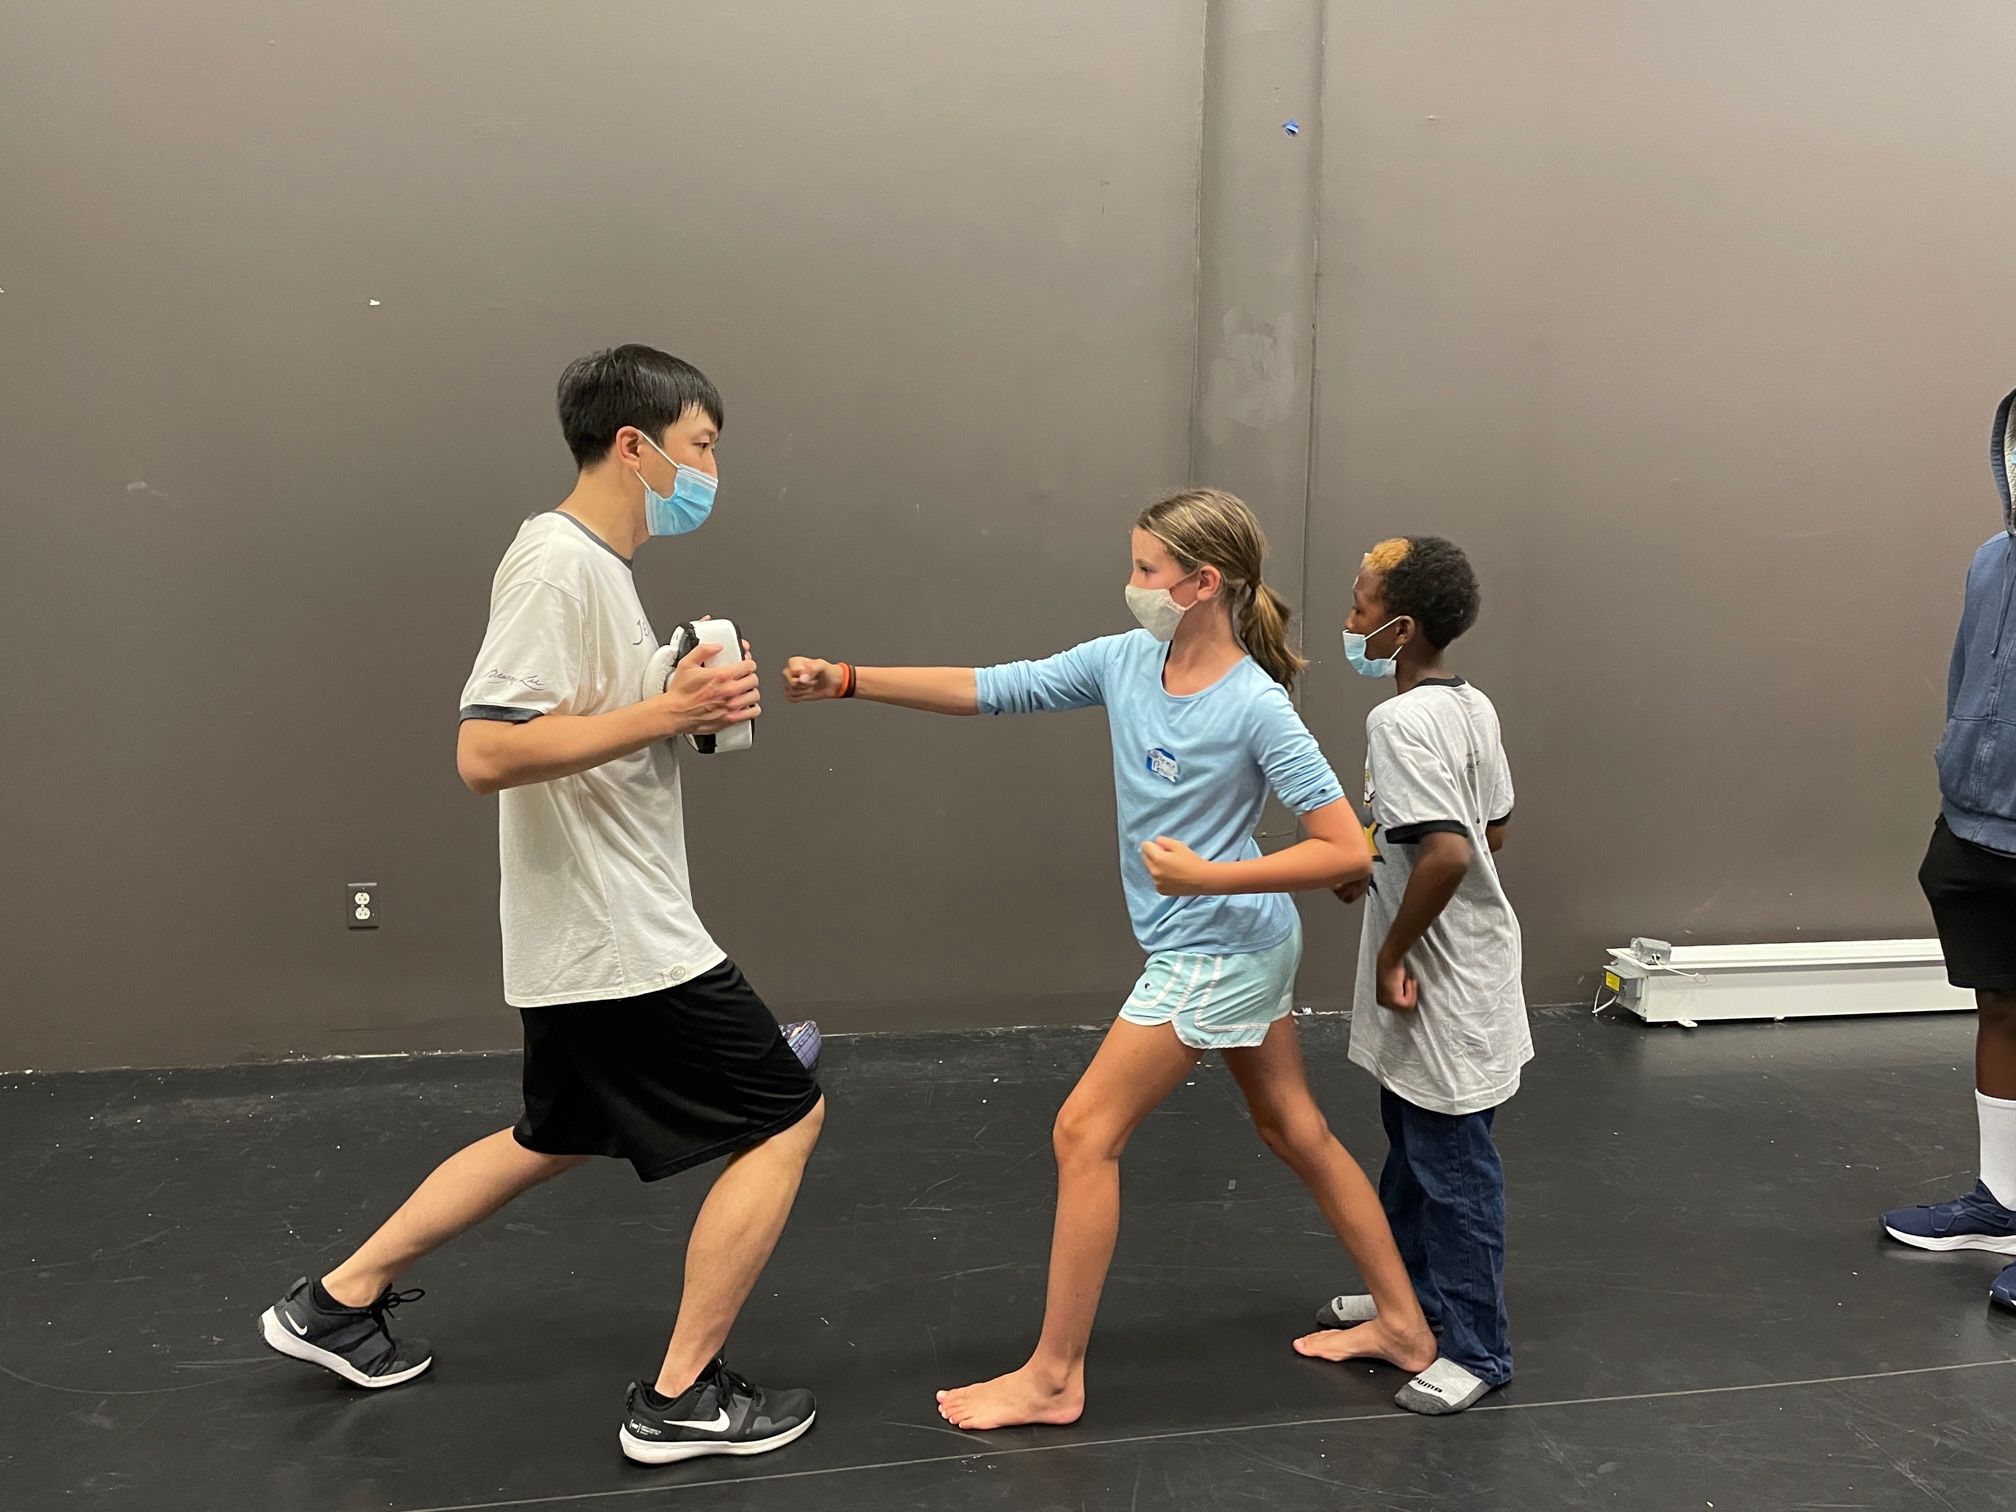 A young girl and boy practicing martial arts with a teacher...